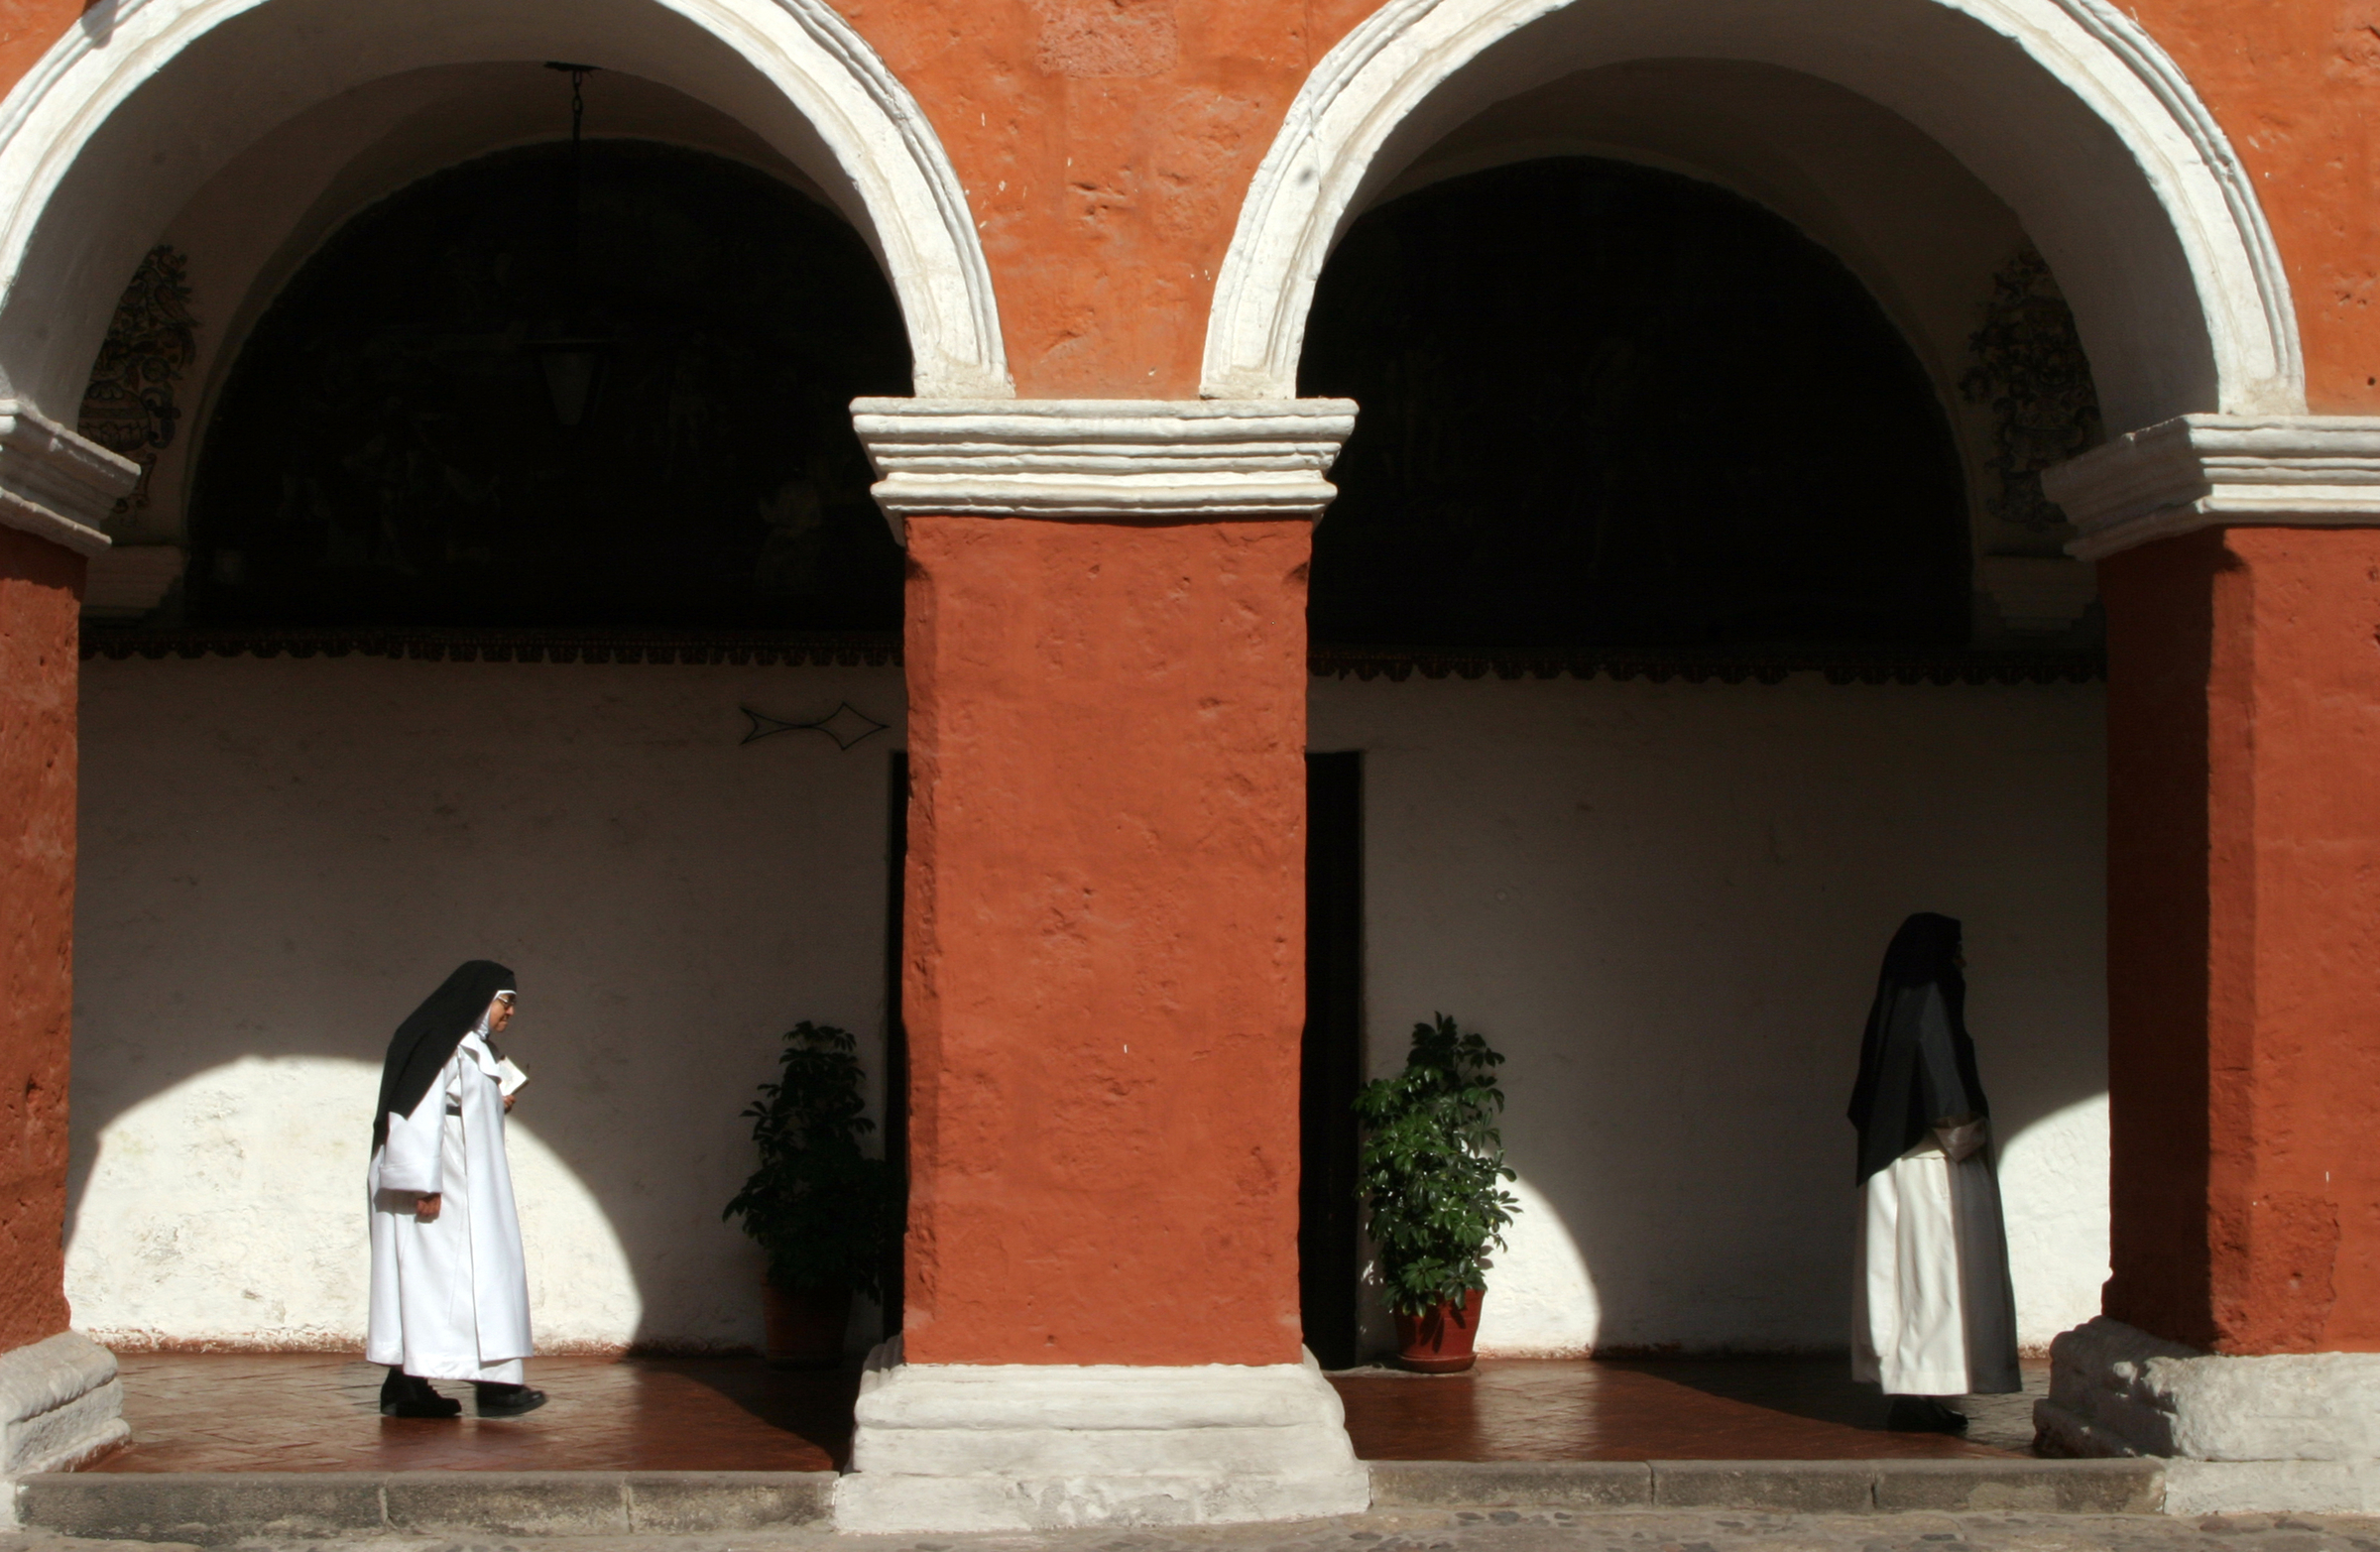  Sister Consuelo de Jesus walks back to the private part of the monastery after morning Mass. 